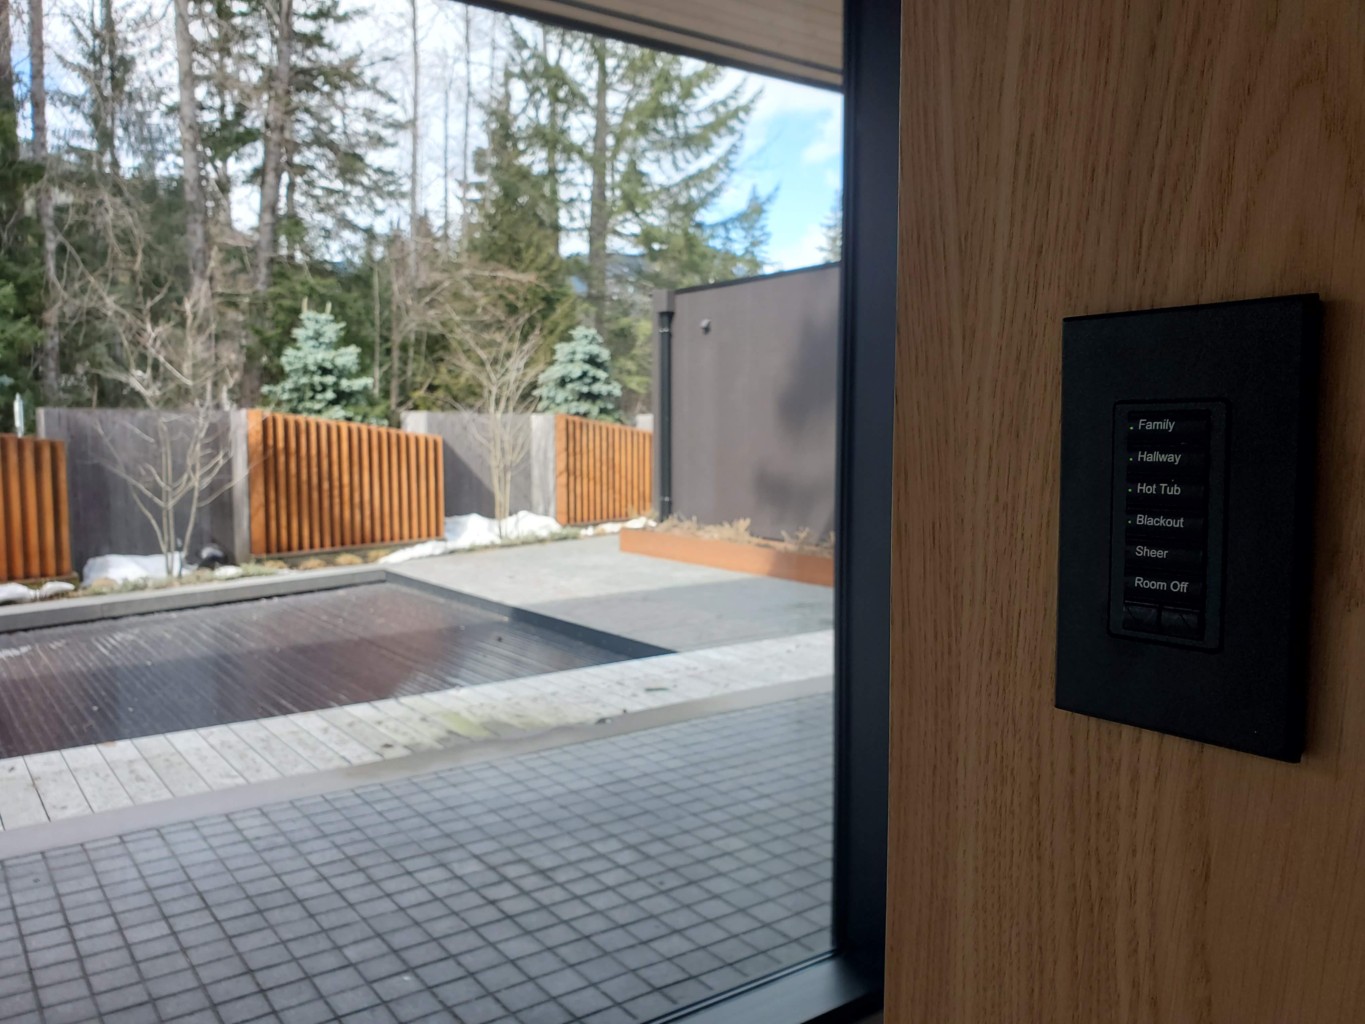 Lutron Automated Lighting installed in this smart home system in Whistler.